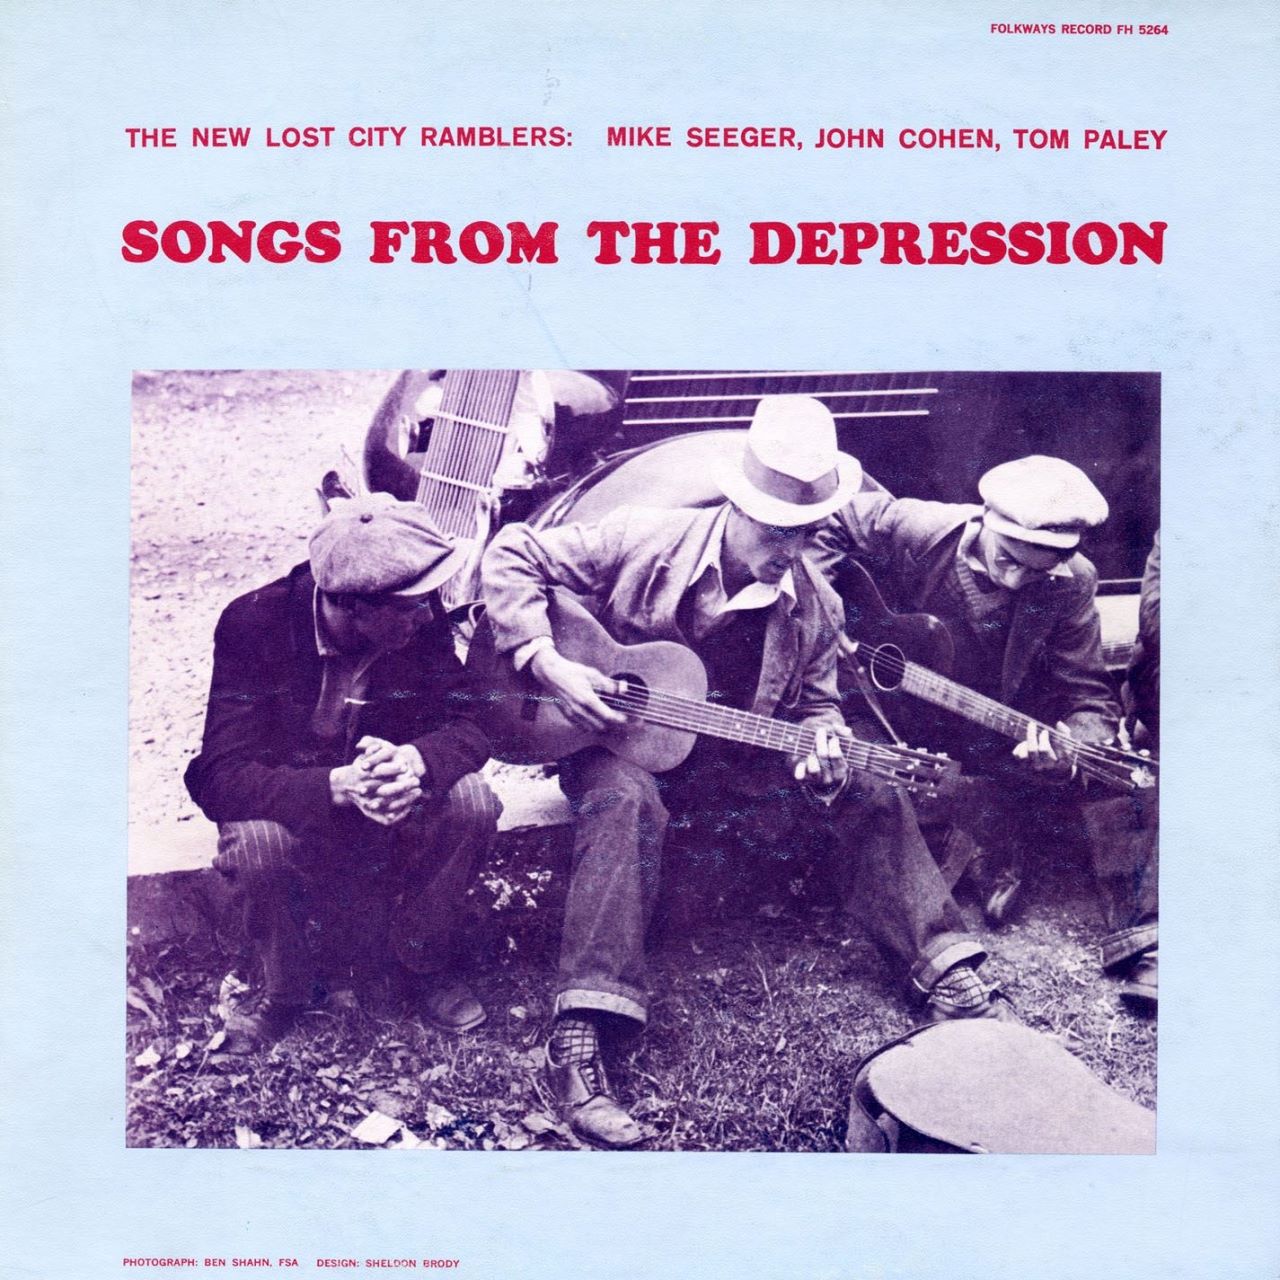 New Lost City Ramblers – Songs From The Depression cover album